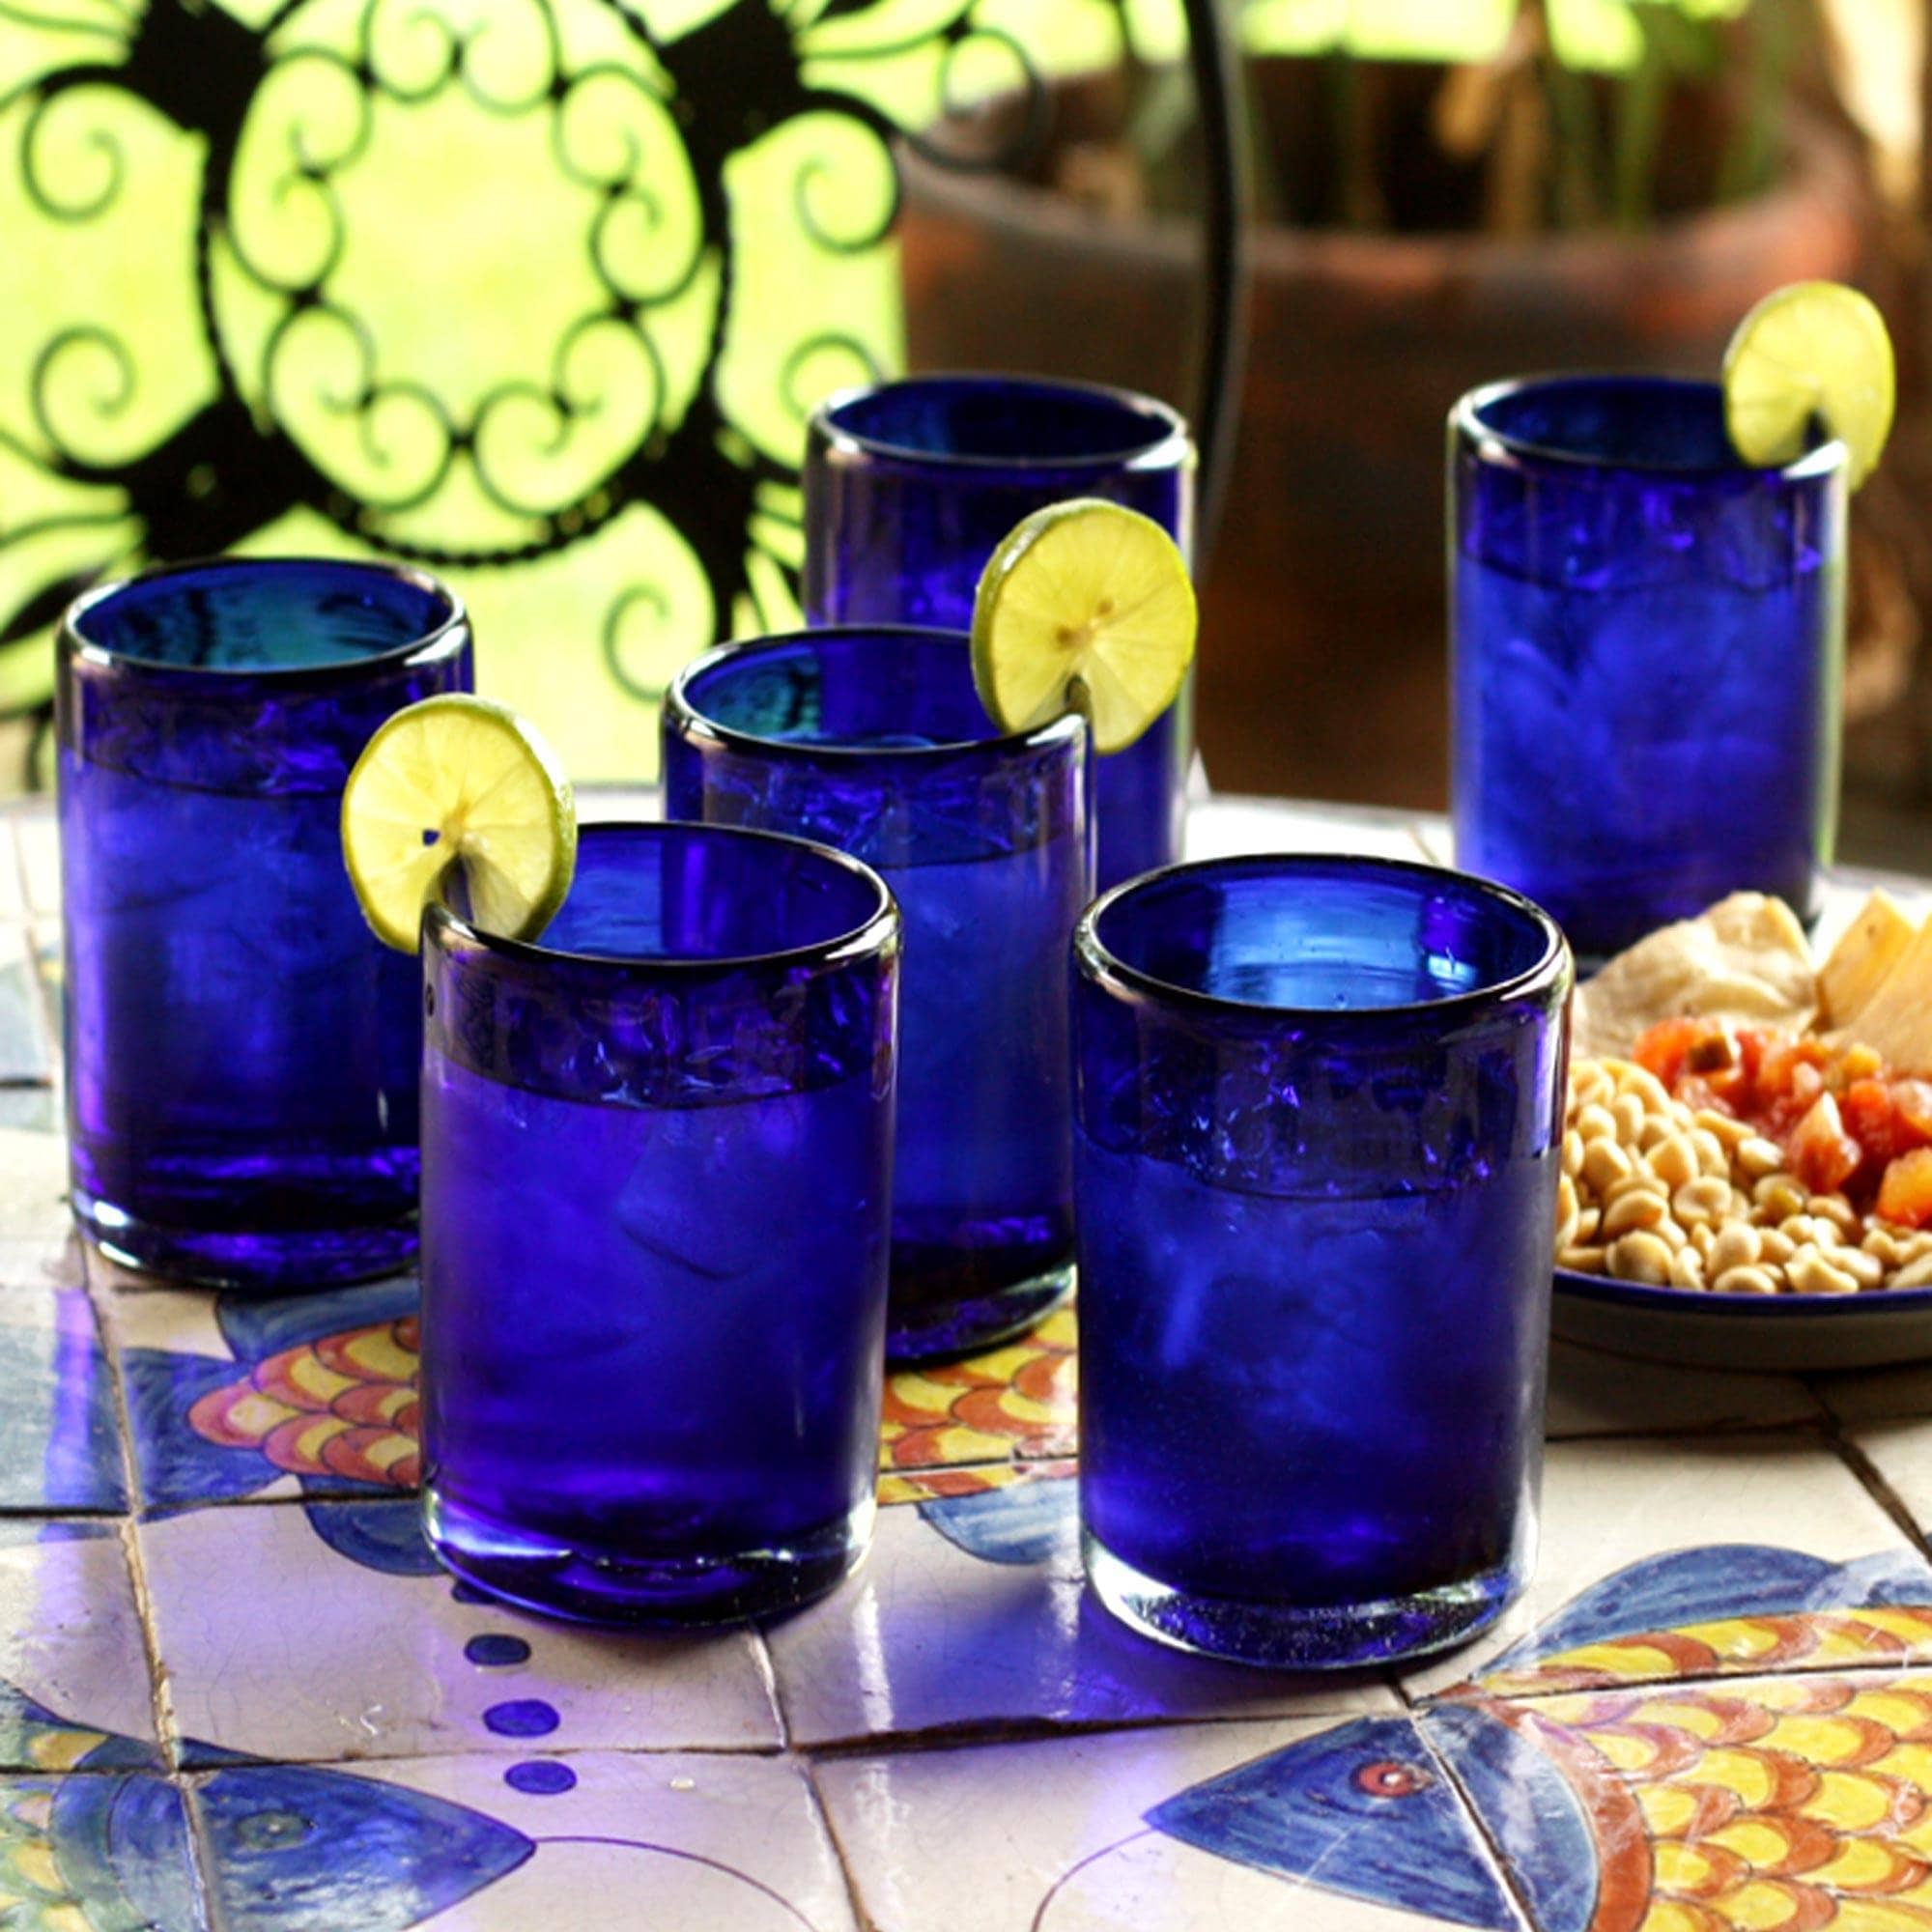 https://ak1.ostkcdn.com/images/products/is/images/direct/0dfc87c96cee715171cdf272ae3686cf6d49ff30/Handmade-Set-of-6-Blue-Conical-Drinking-Glasses-%28Mexico%29.jpg